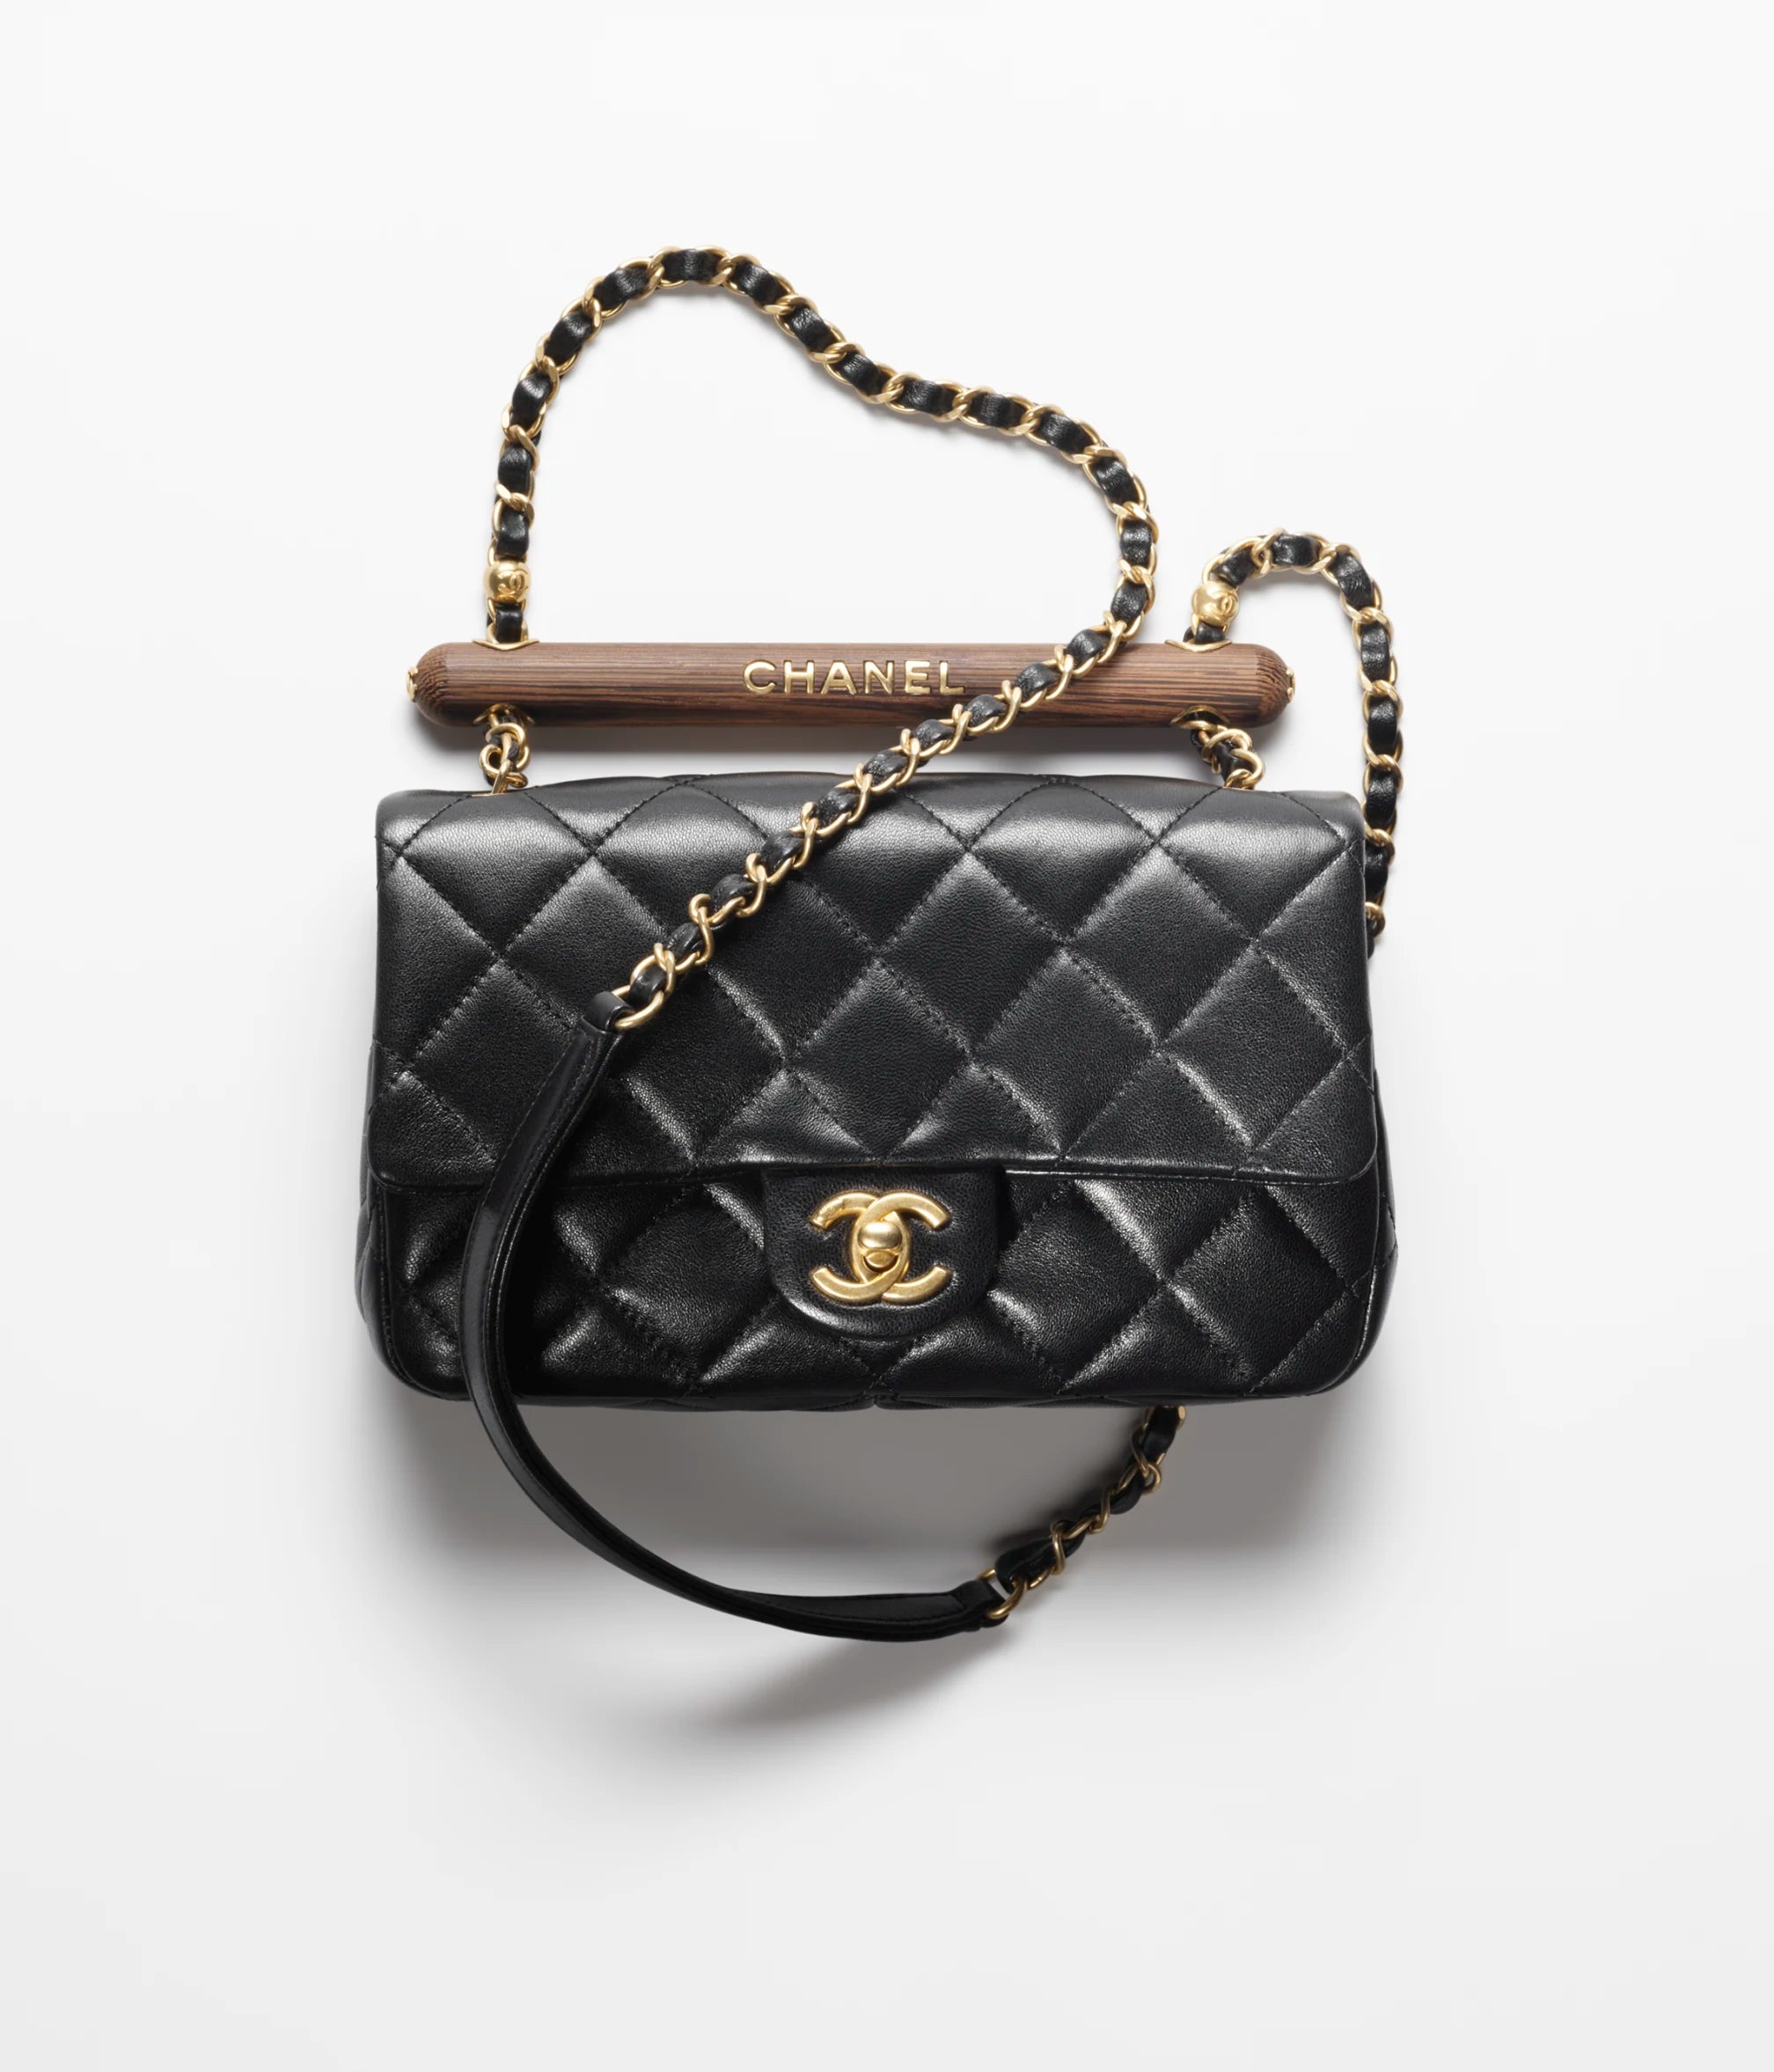 Chanel 23A Handbags Review with Prices Chanel 22 Mini Chanel 31